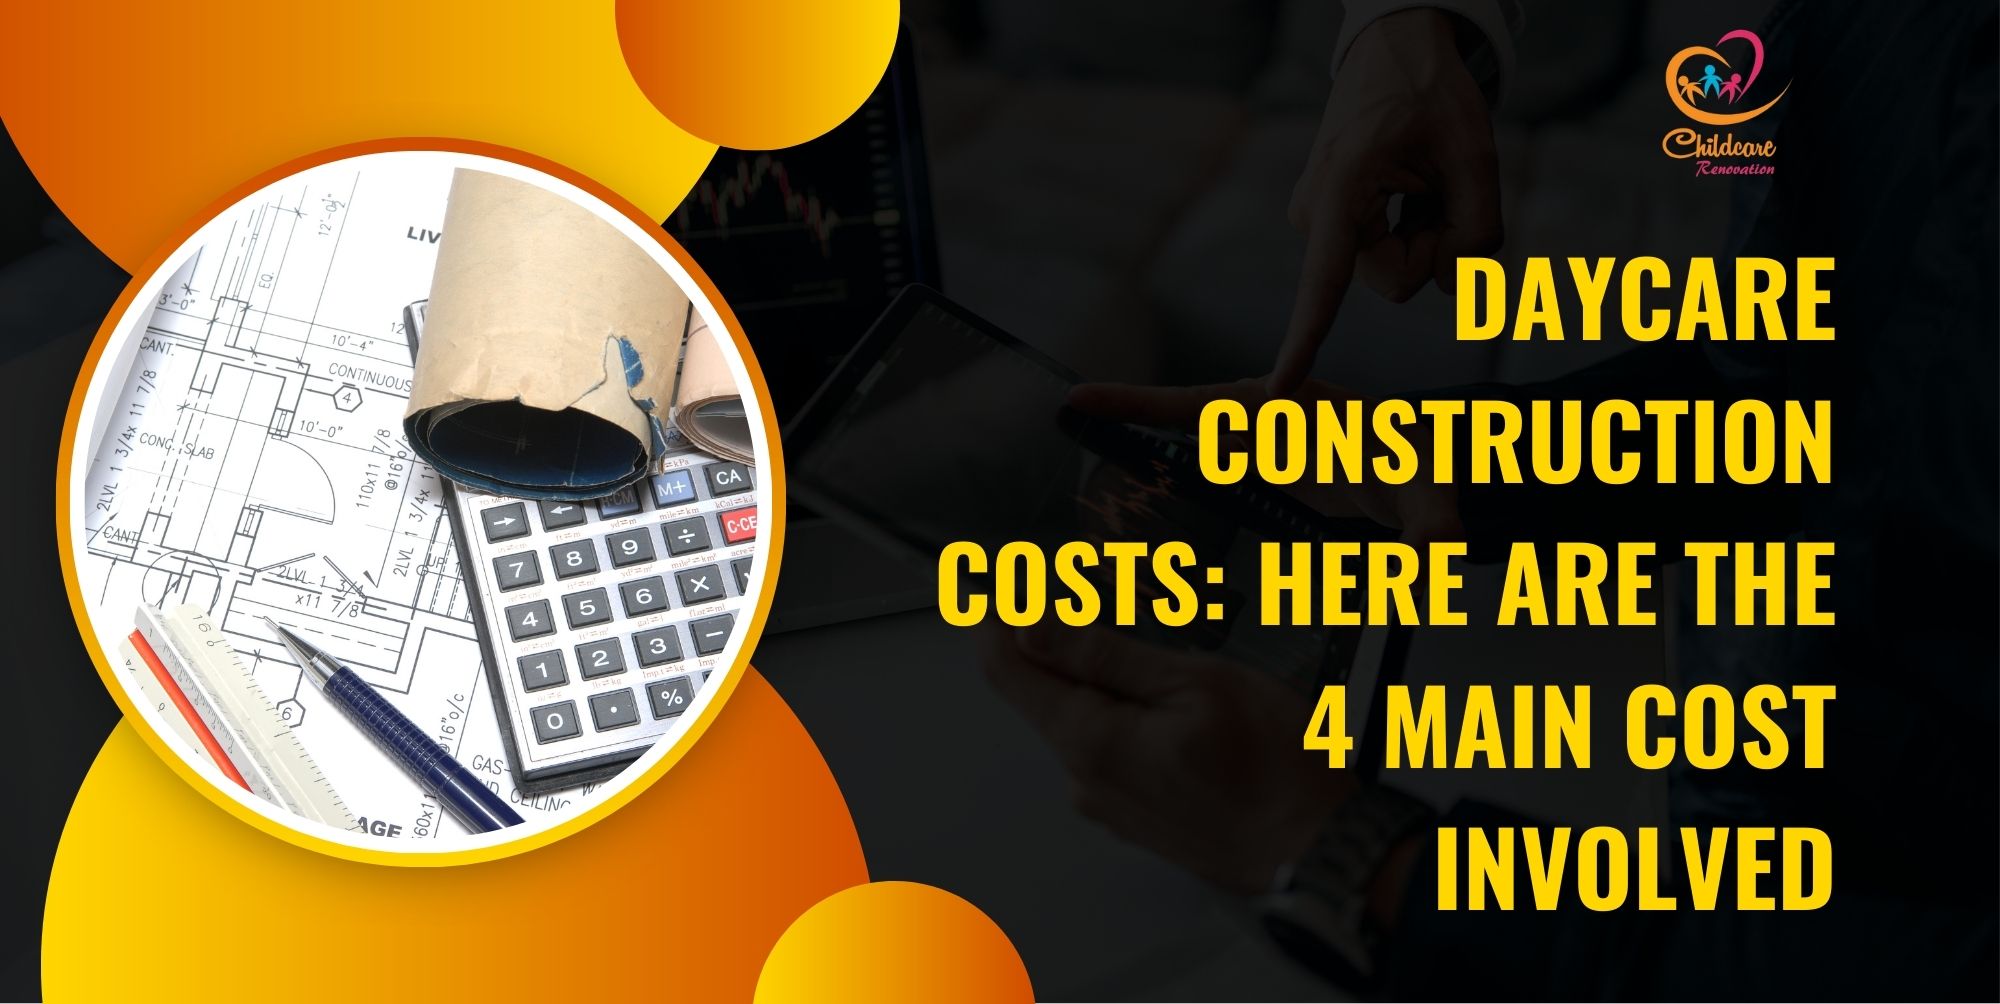 Daycare Construction Costs